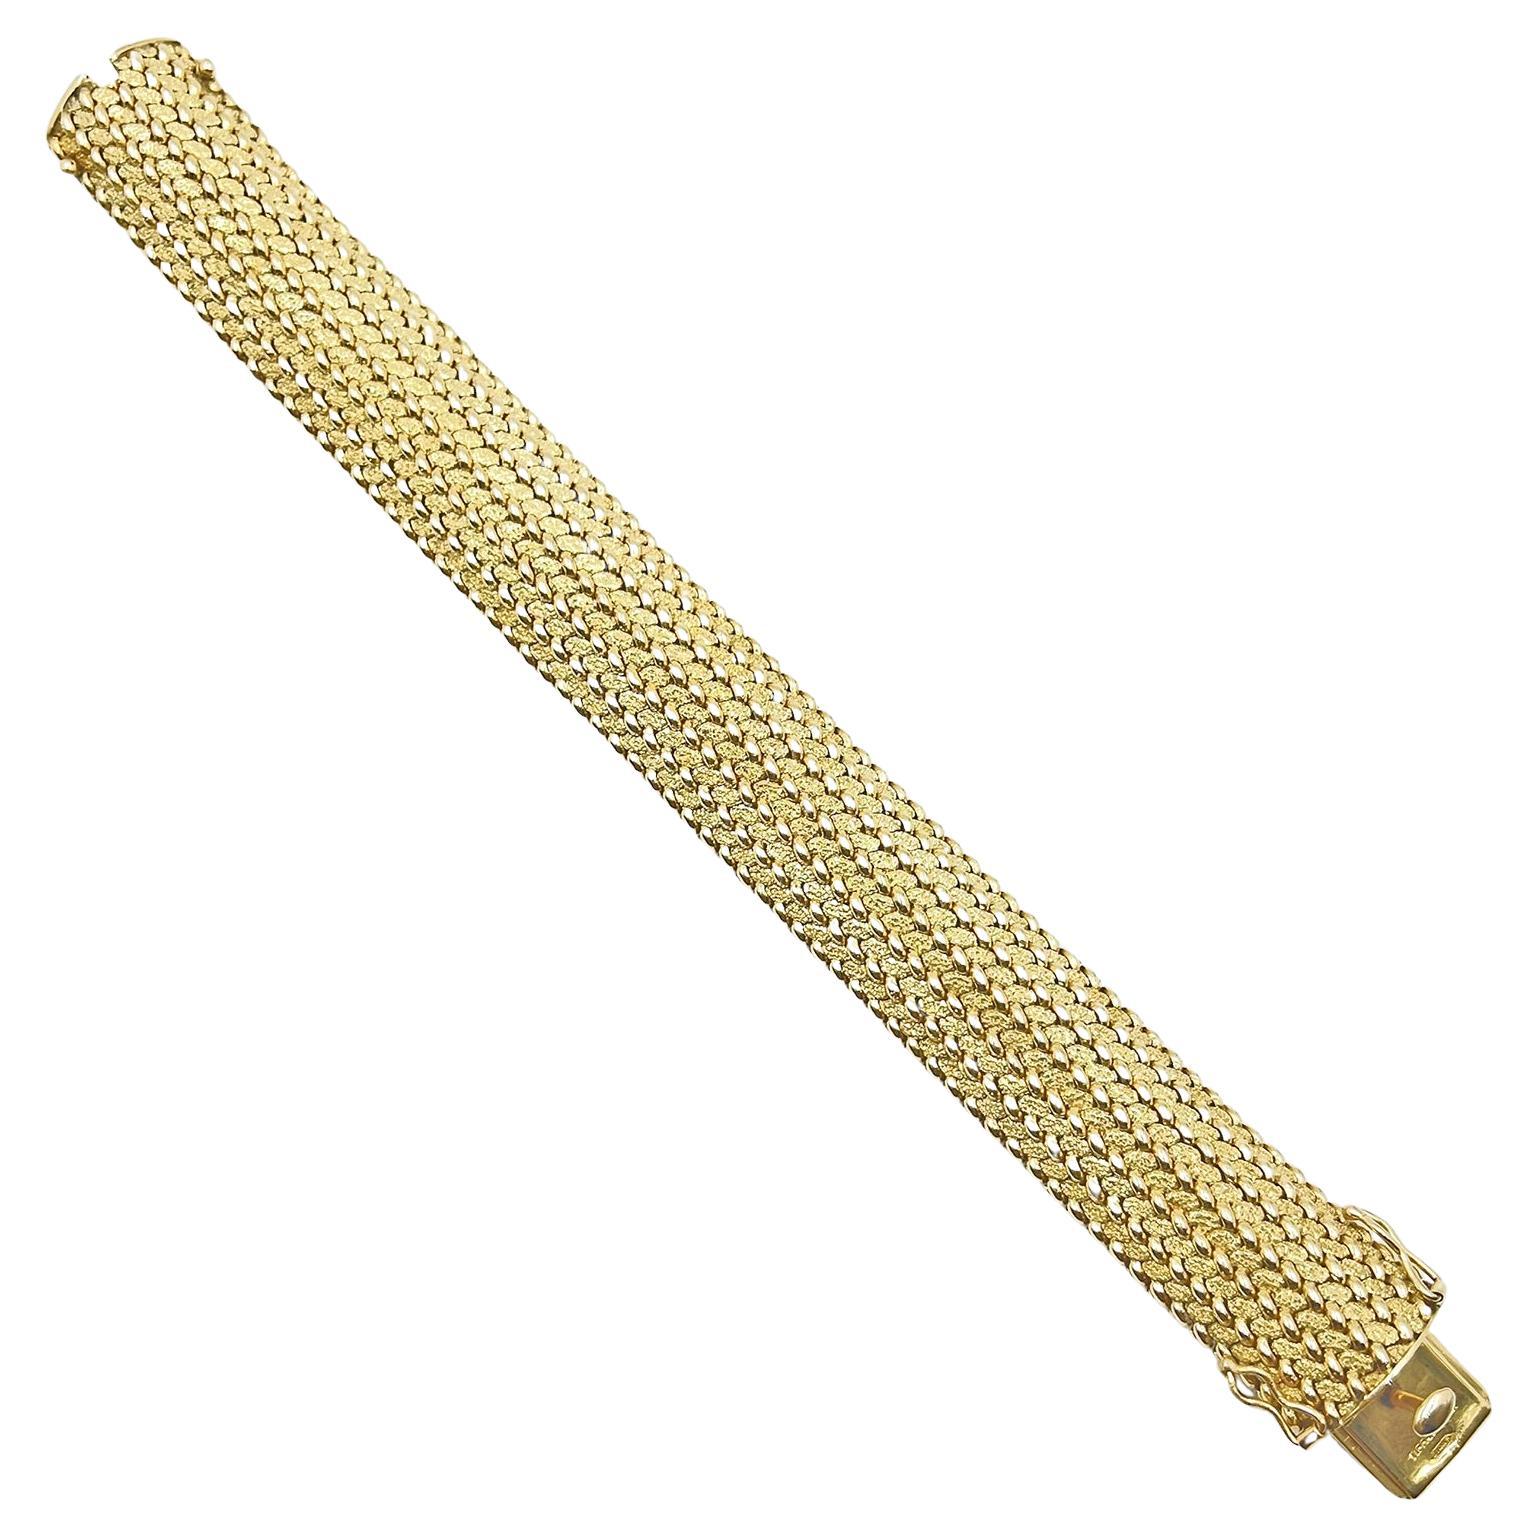 Tiffany woven 14k yellow gold bracelet, featuring a curved design with a polished beaded accent with a textured finish in between.  Signed 'Tiffany & Co' 'S14KS' on the underside of the clasp and '14k' on the tongue.  Double safety latches. 
 0.75